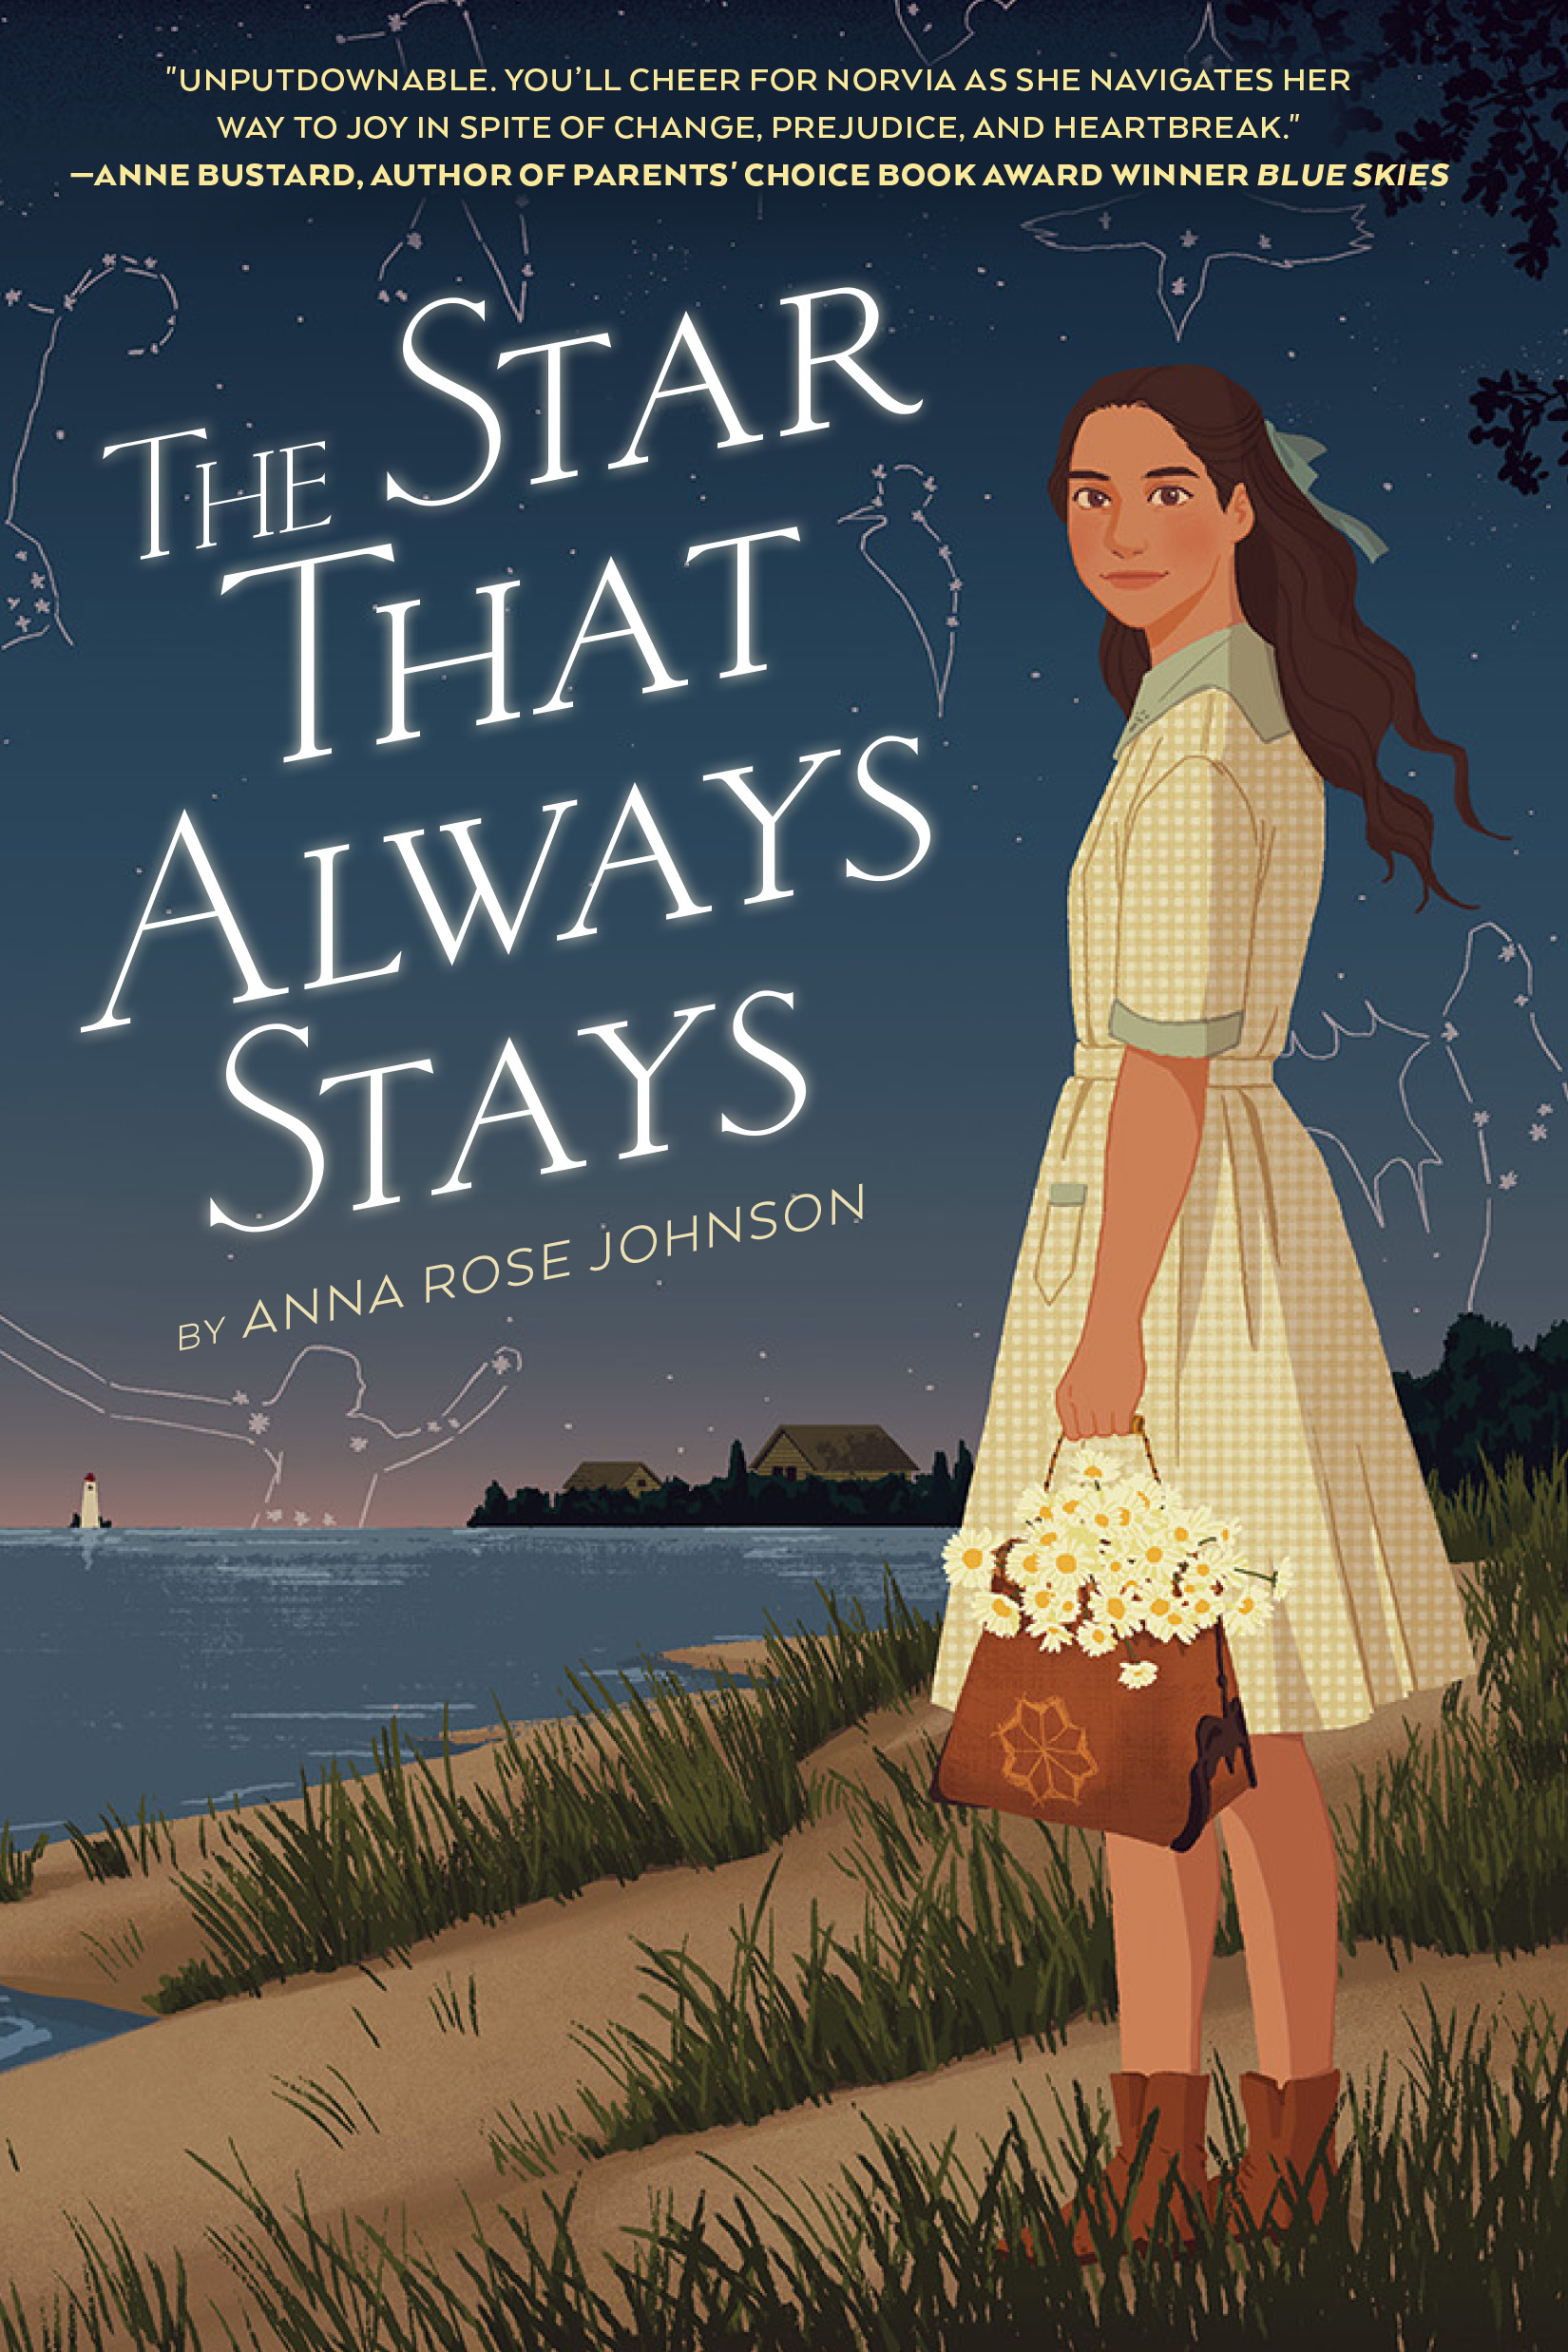 Blending the Family Story with the Coming-of-Age Novel, a guest post by Anna Rose Johnson